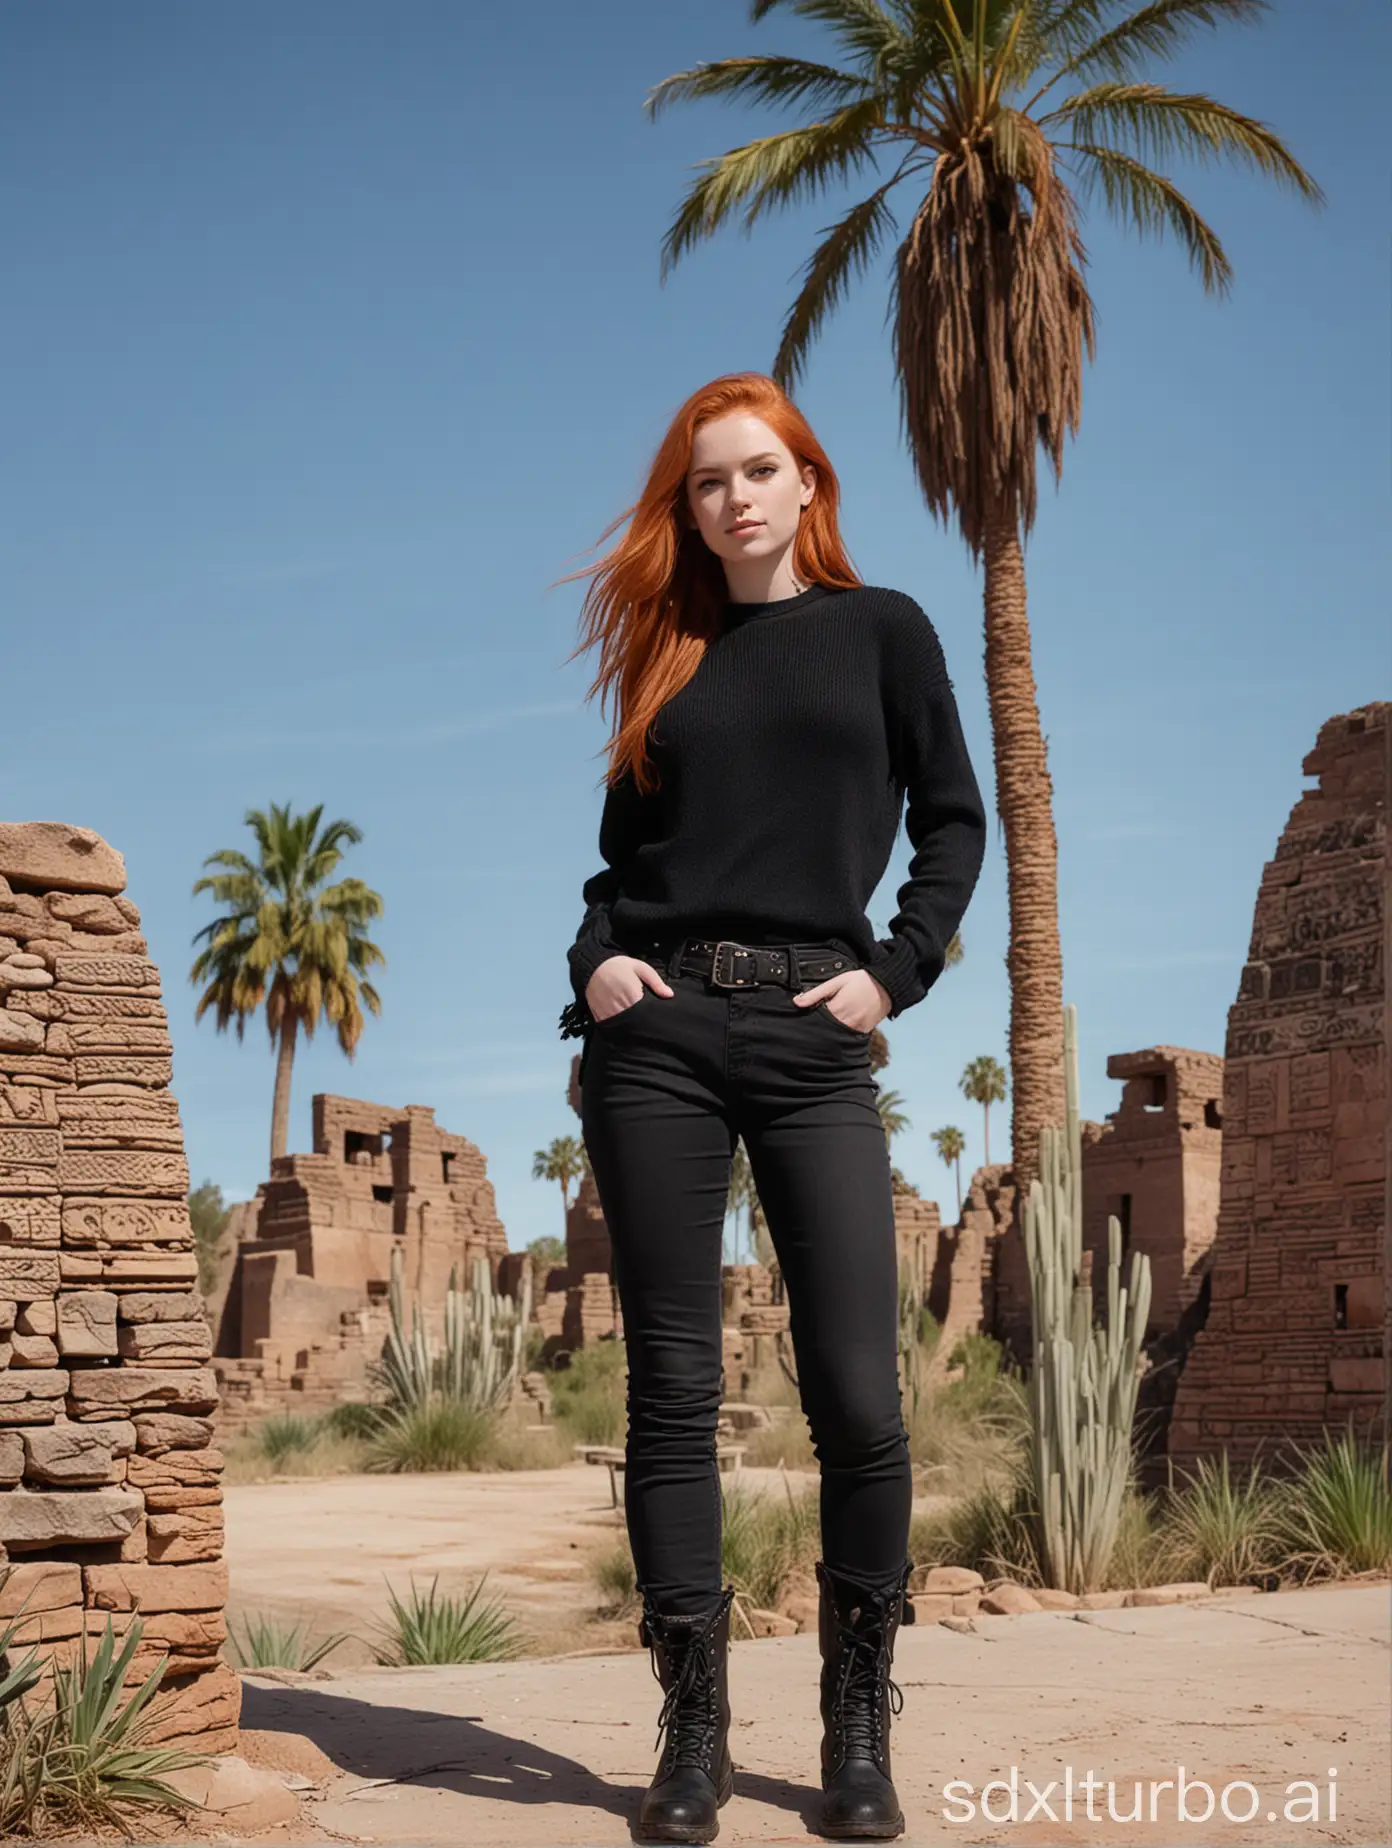 Nice redheaded girl in black jeans and black sweater, wearing combat boots, set against Aztec ruins with palm trees and a very blue sky